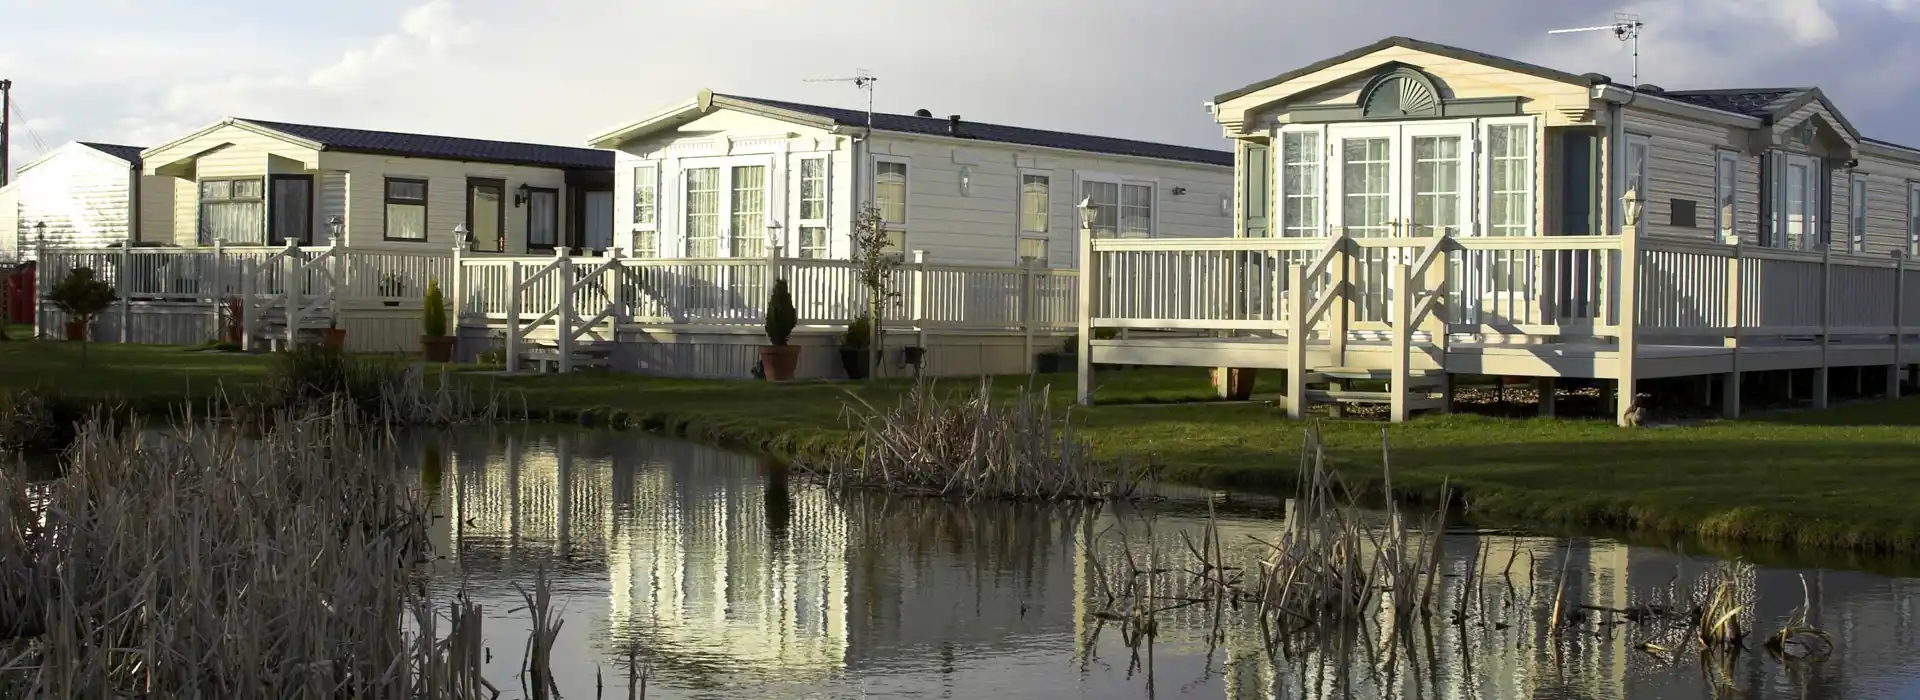 Adult only holiday parks